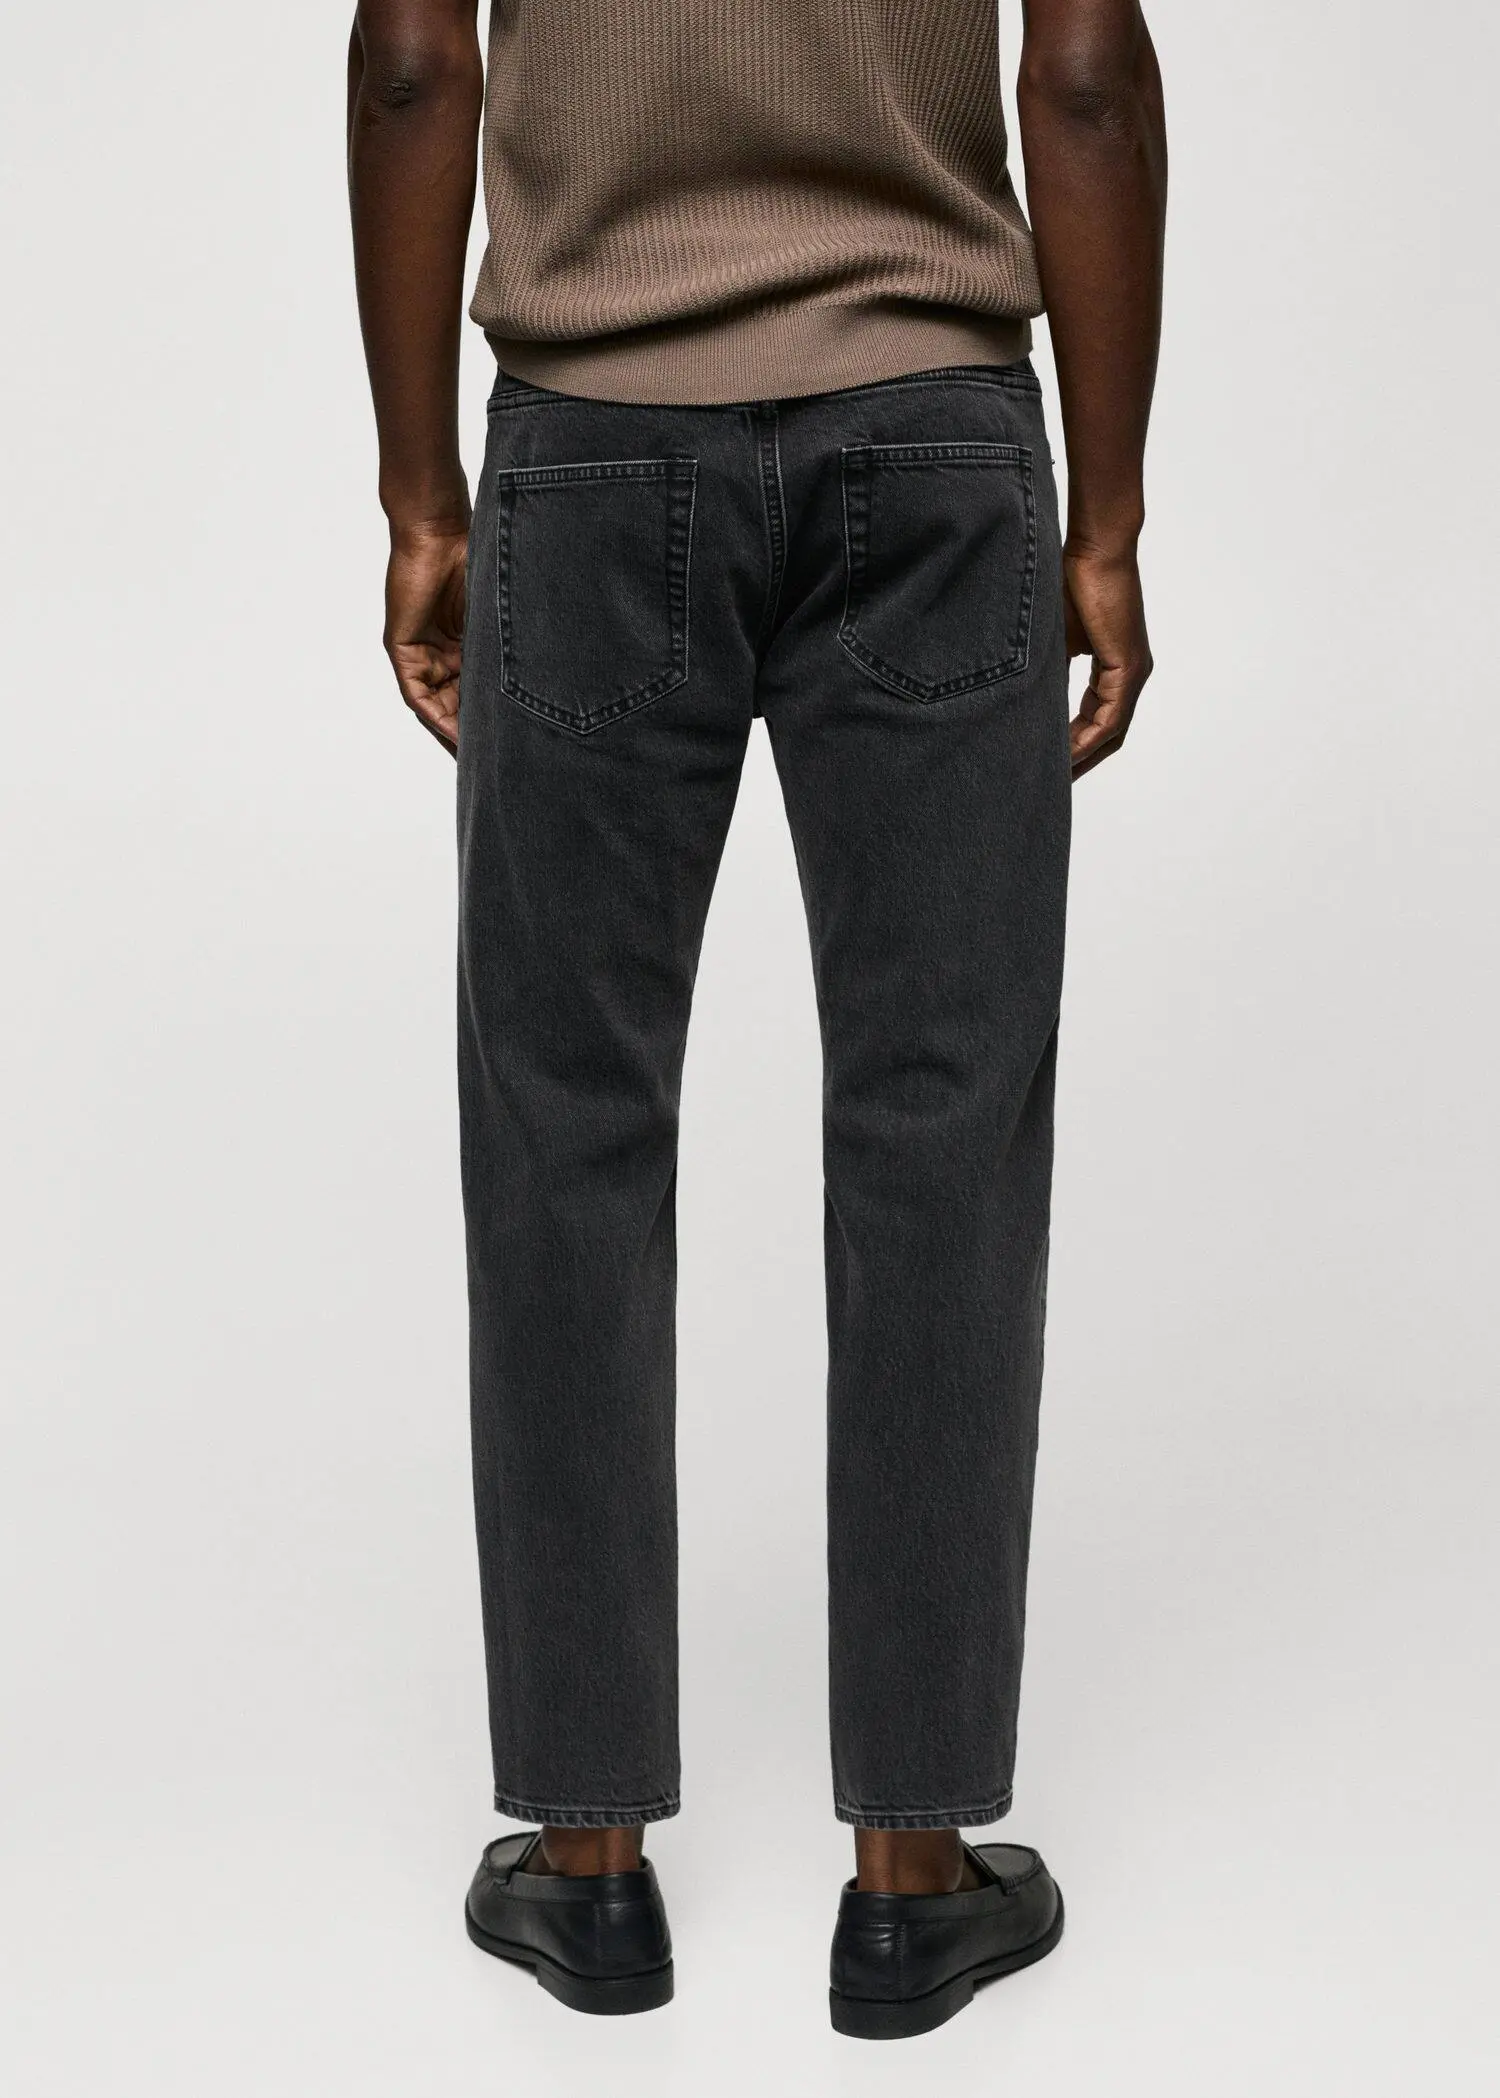 Mango Ben tapered cropped jeans. a person wearing a pair of black jeans. 